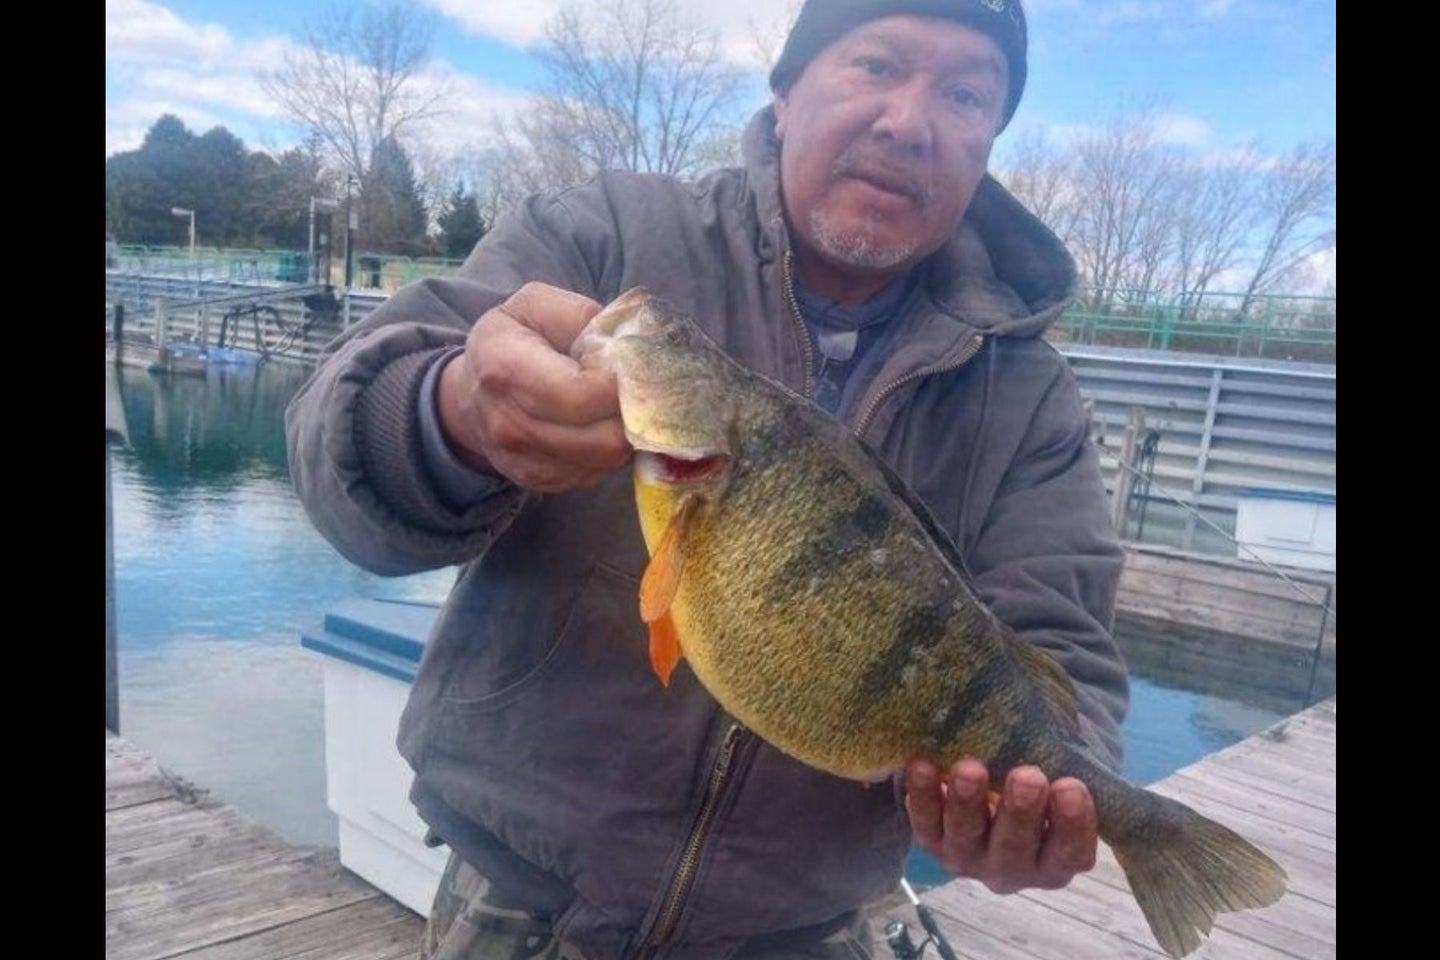 An angler poses with a state-record perch.